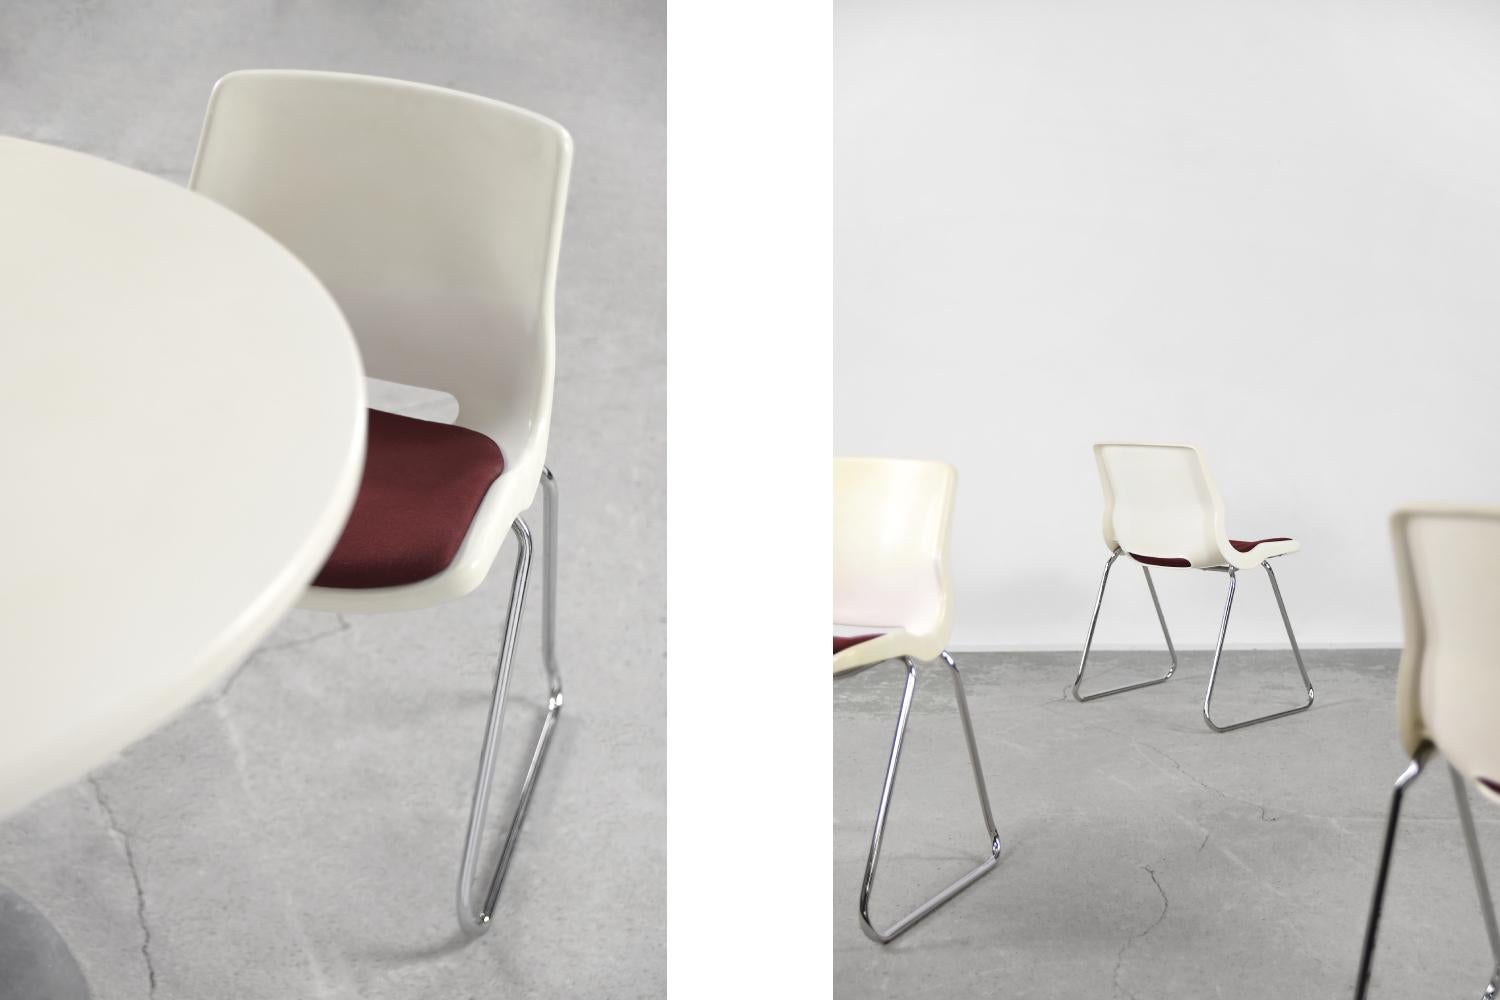 Set of 5 Vintage Mid-Century Modern Scandinavian Plastic & Fabric Chairs, 1970s For Sale 7